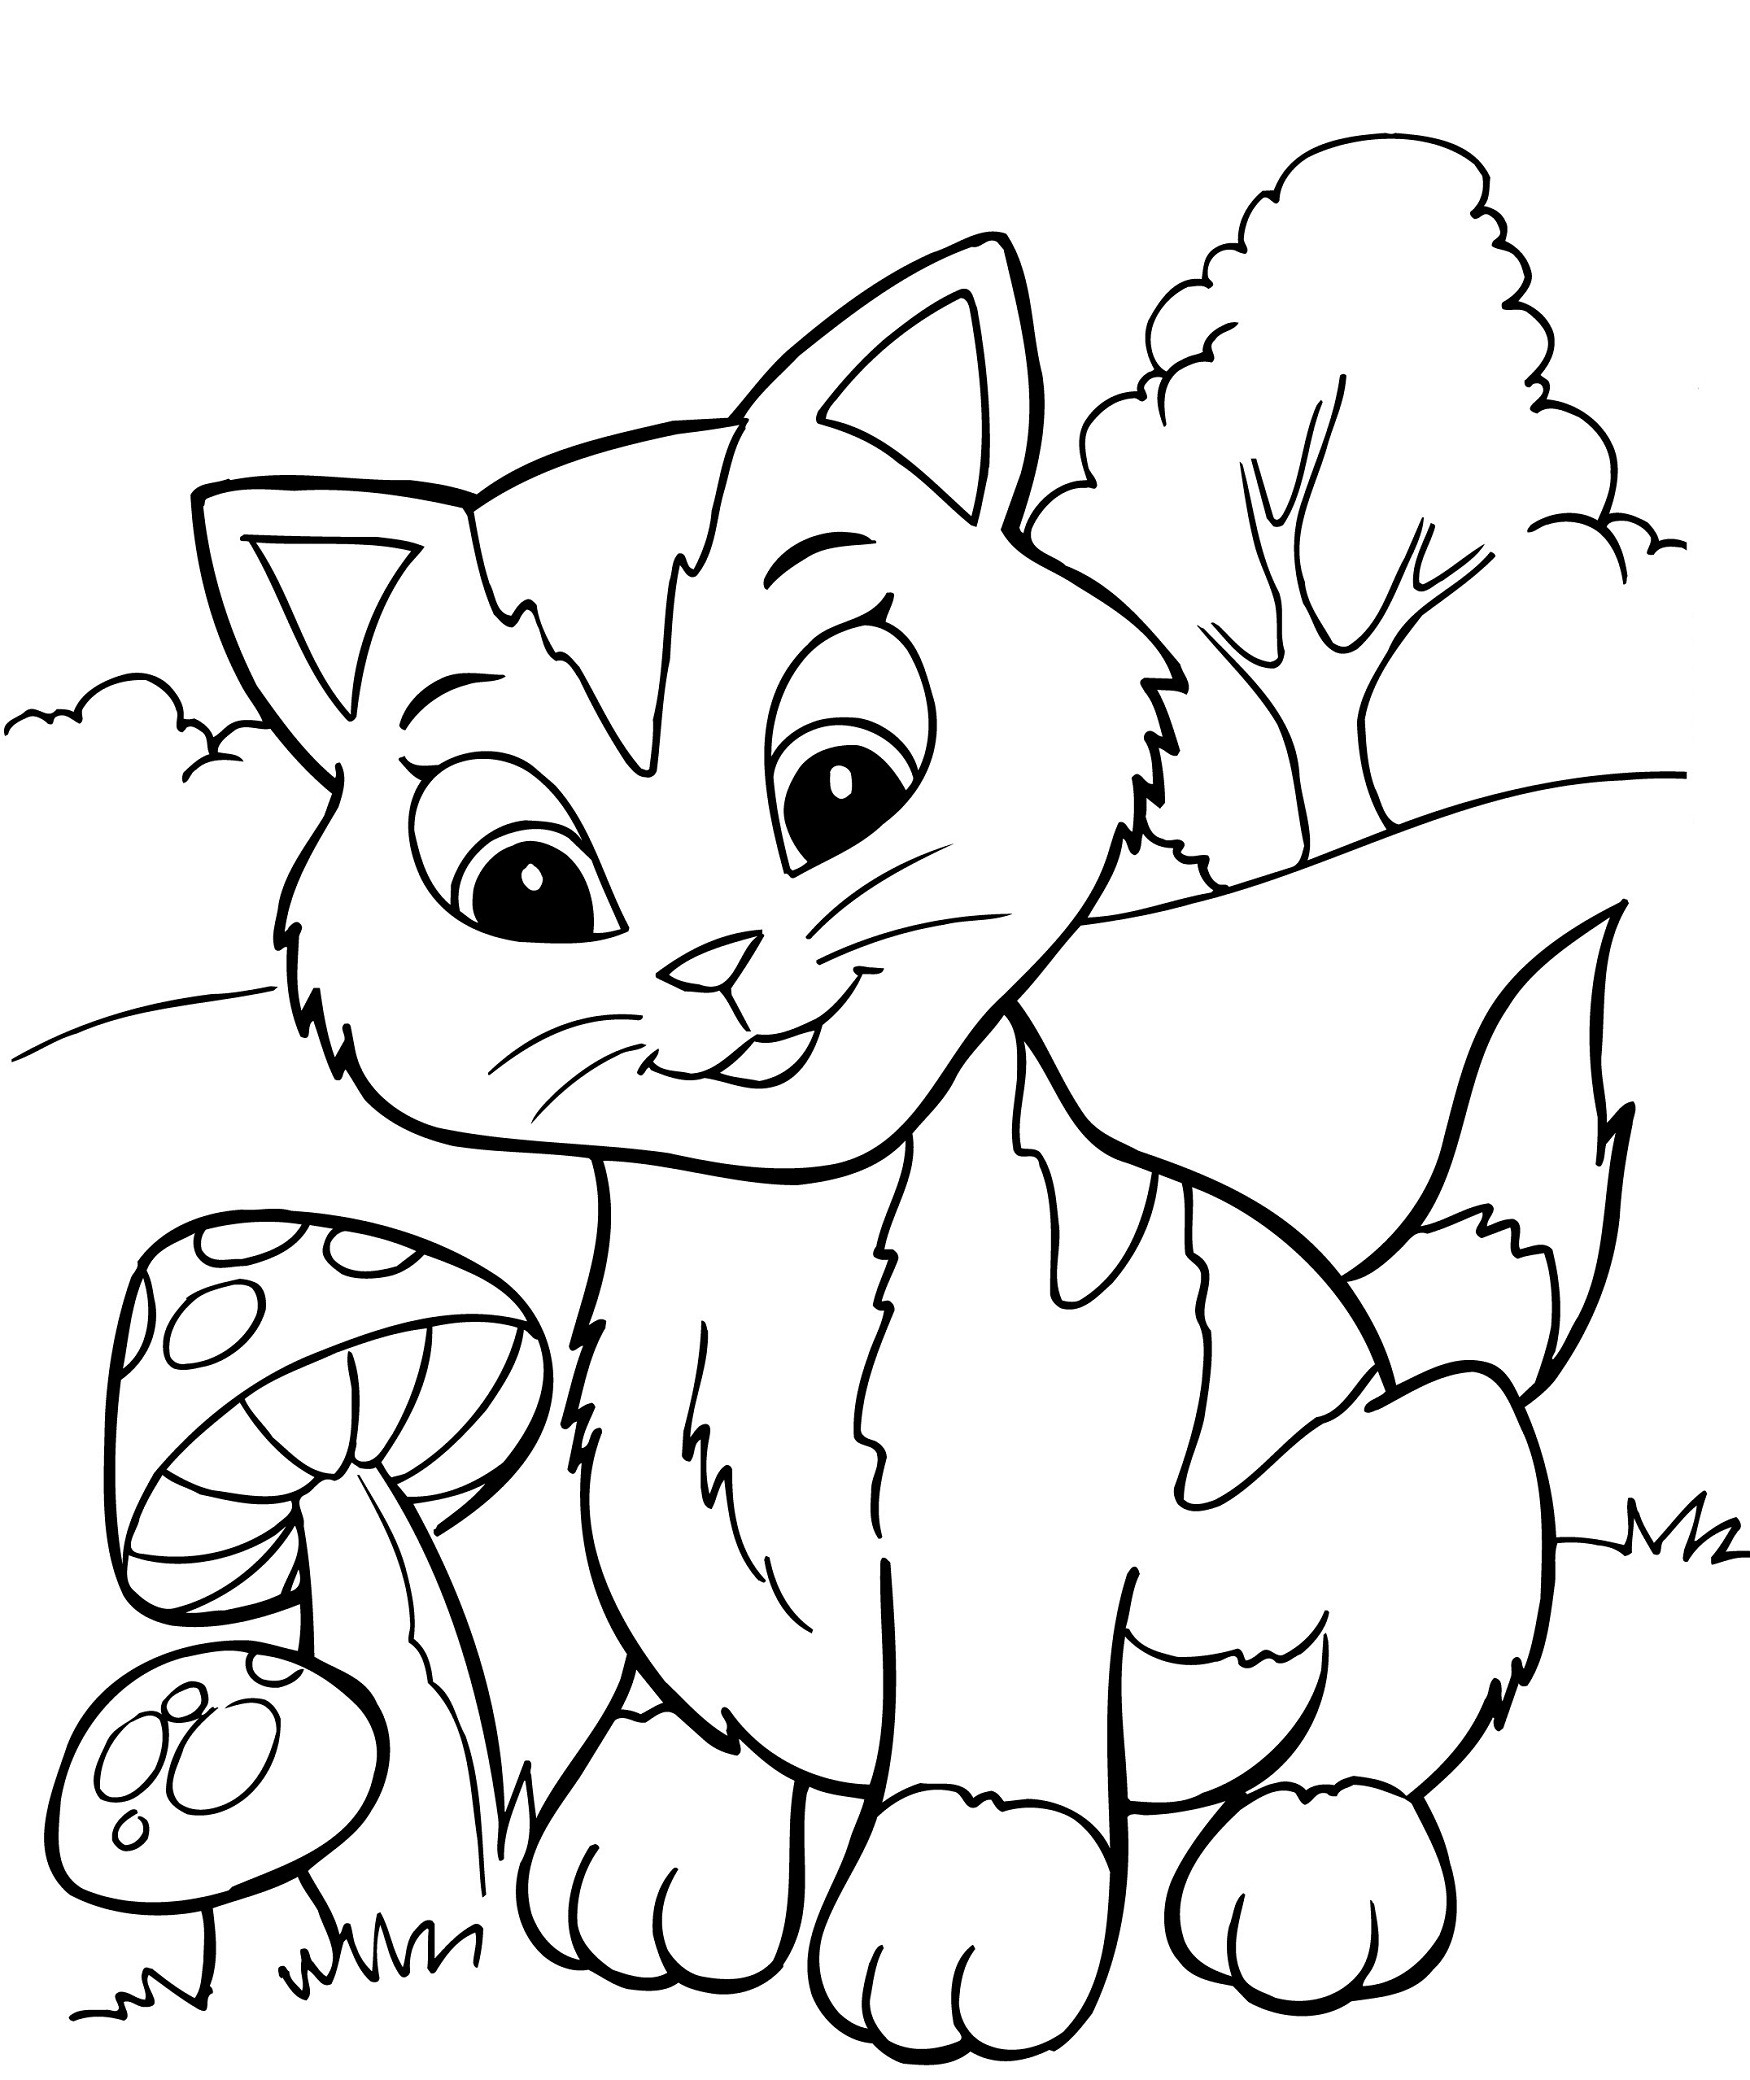 Best Coloring Books For Toddlers
 Free Printable Kitten Coloring Pages For Kids Best